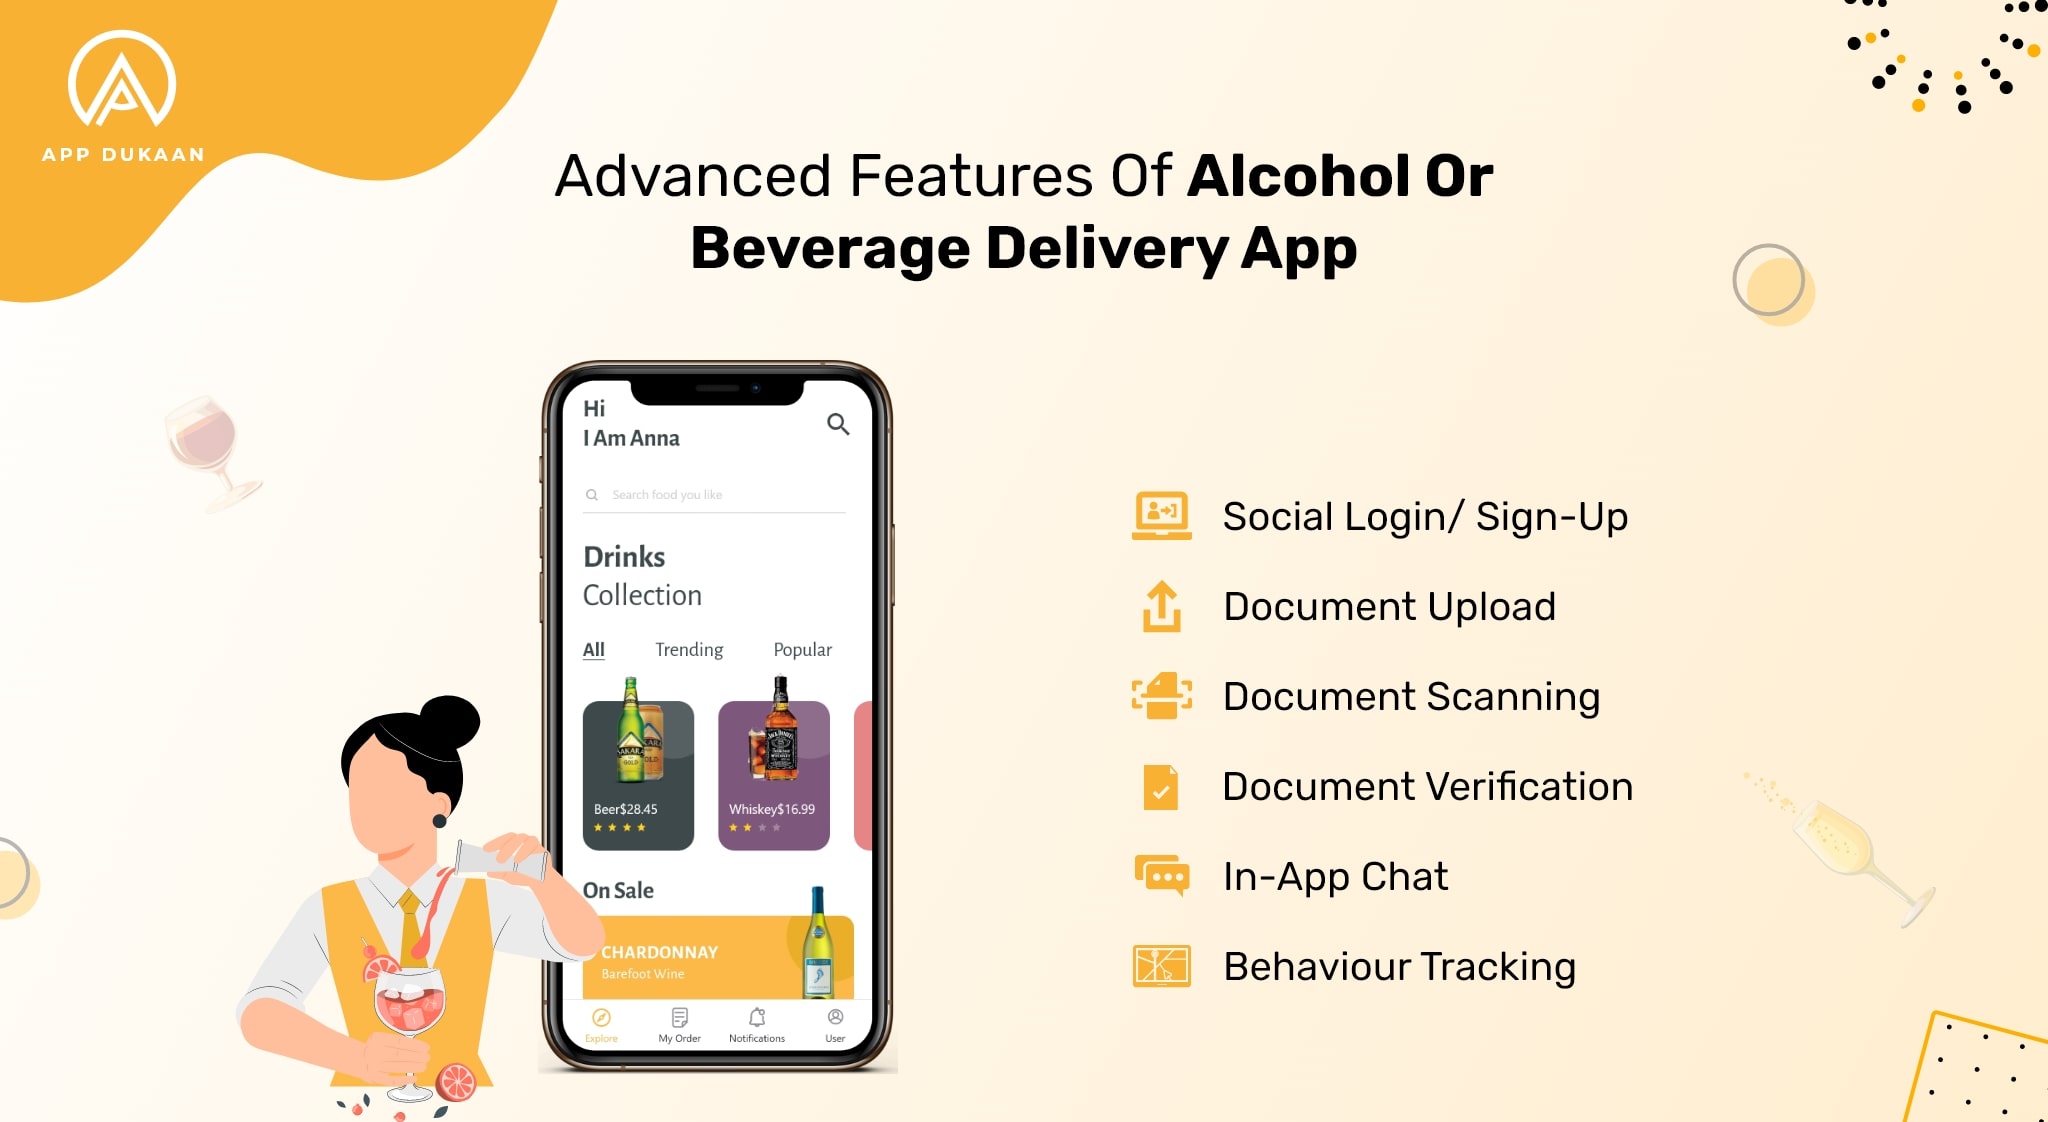 advanced features of alcohol delivery app